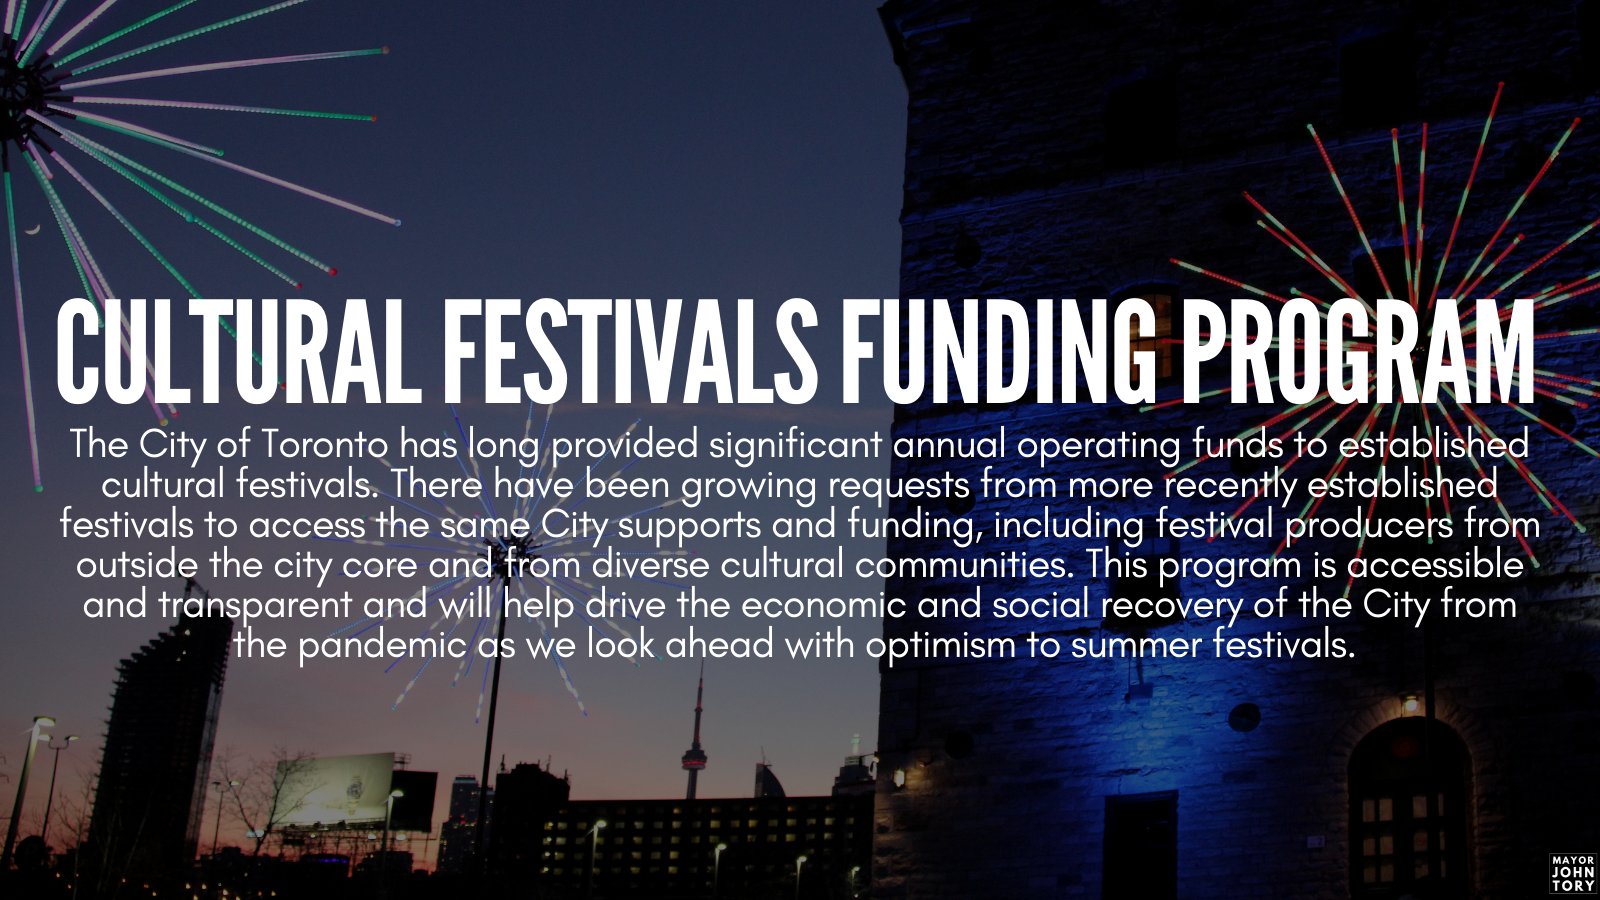 Cultural Festivals Funding Program and enhanced funding for cultural organizations outside of the city core